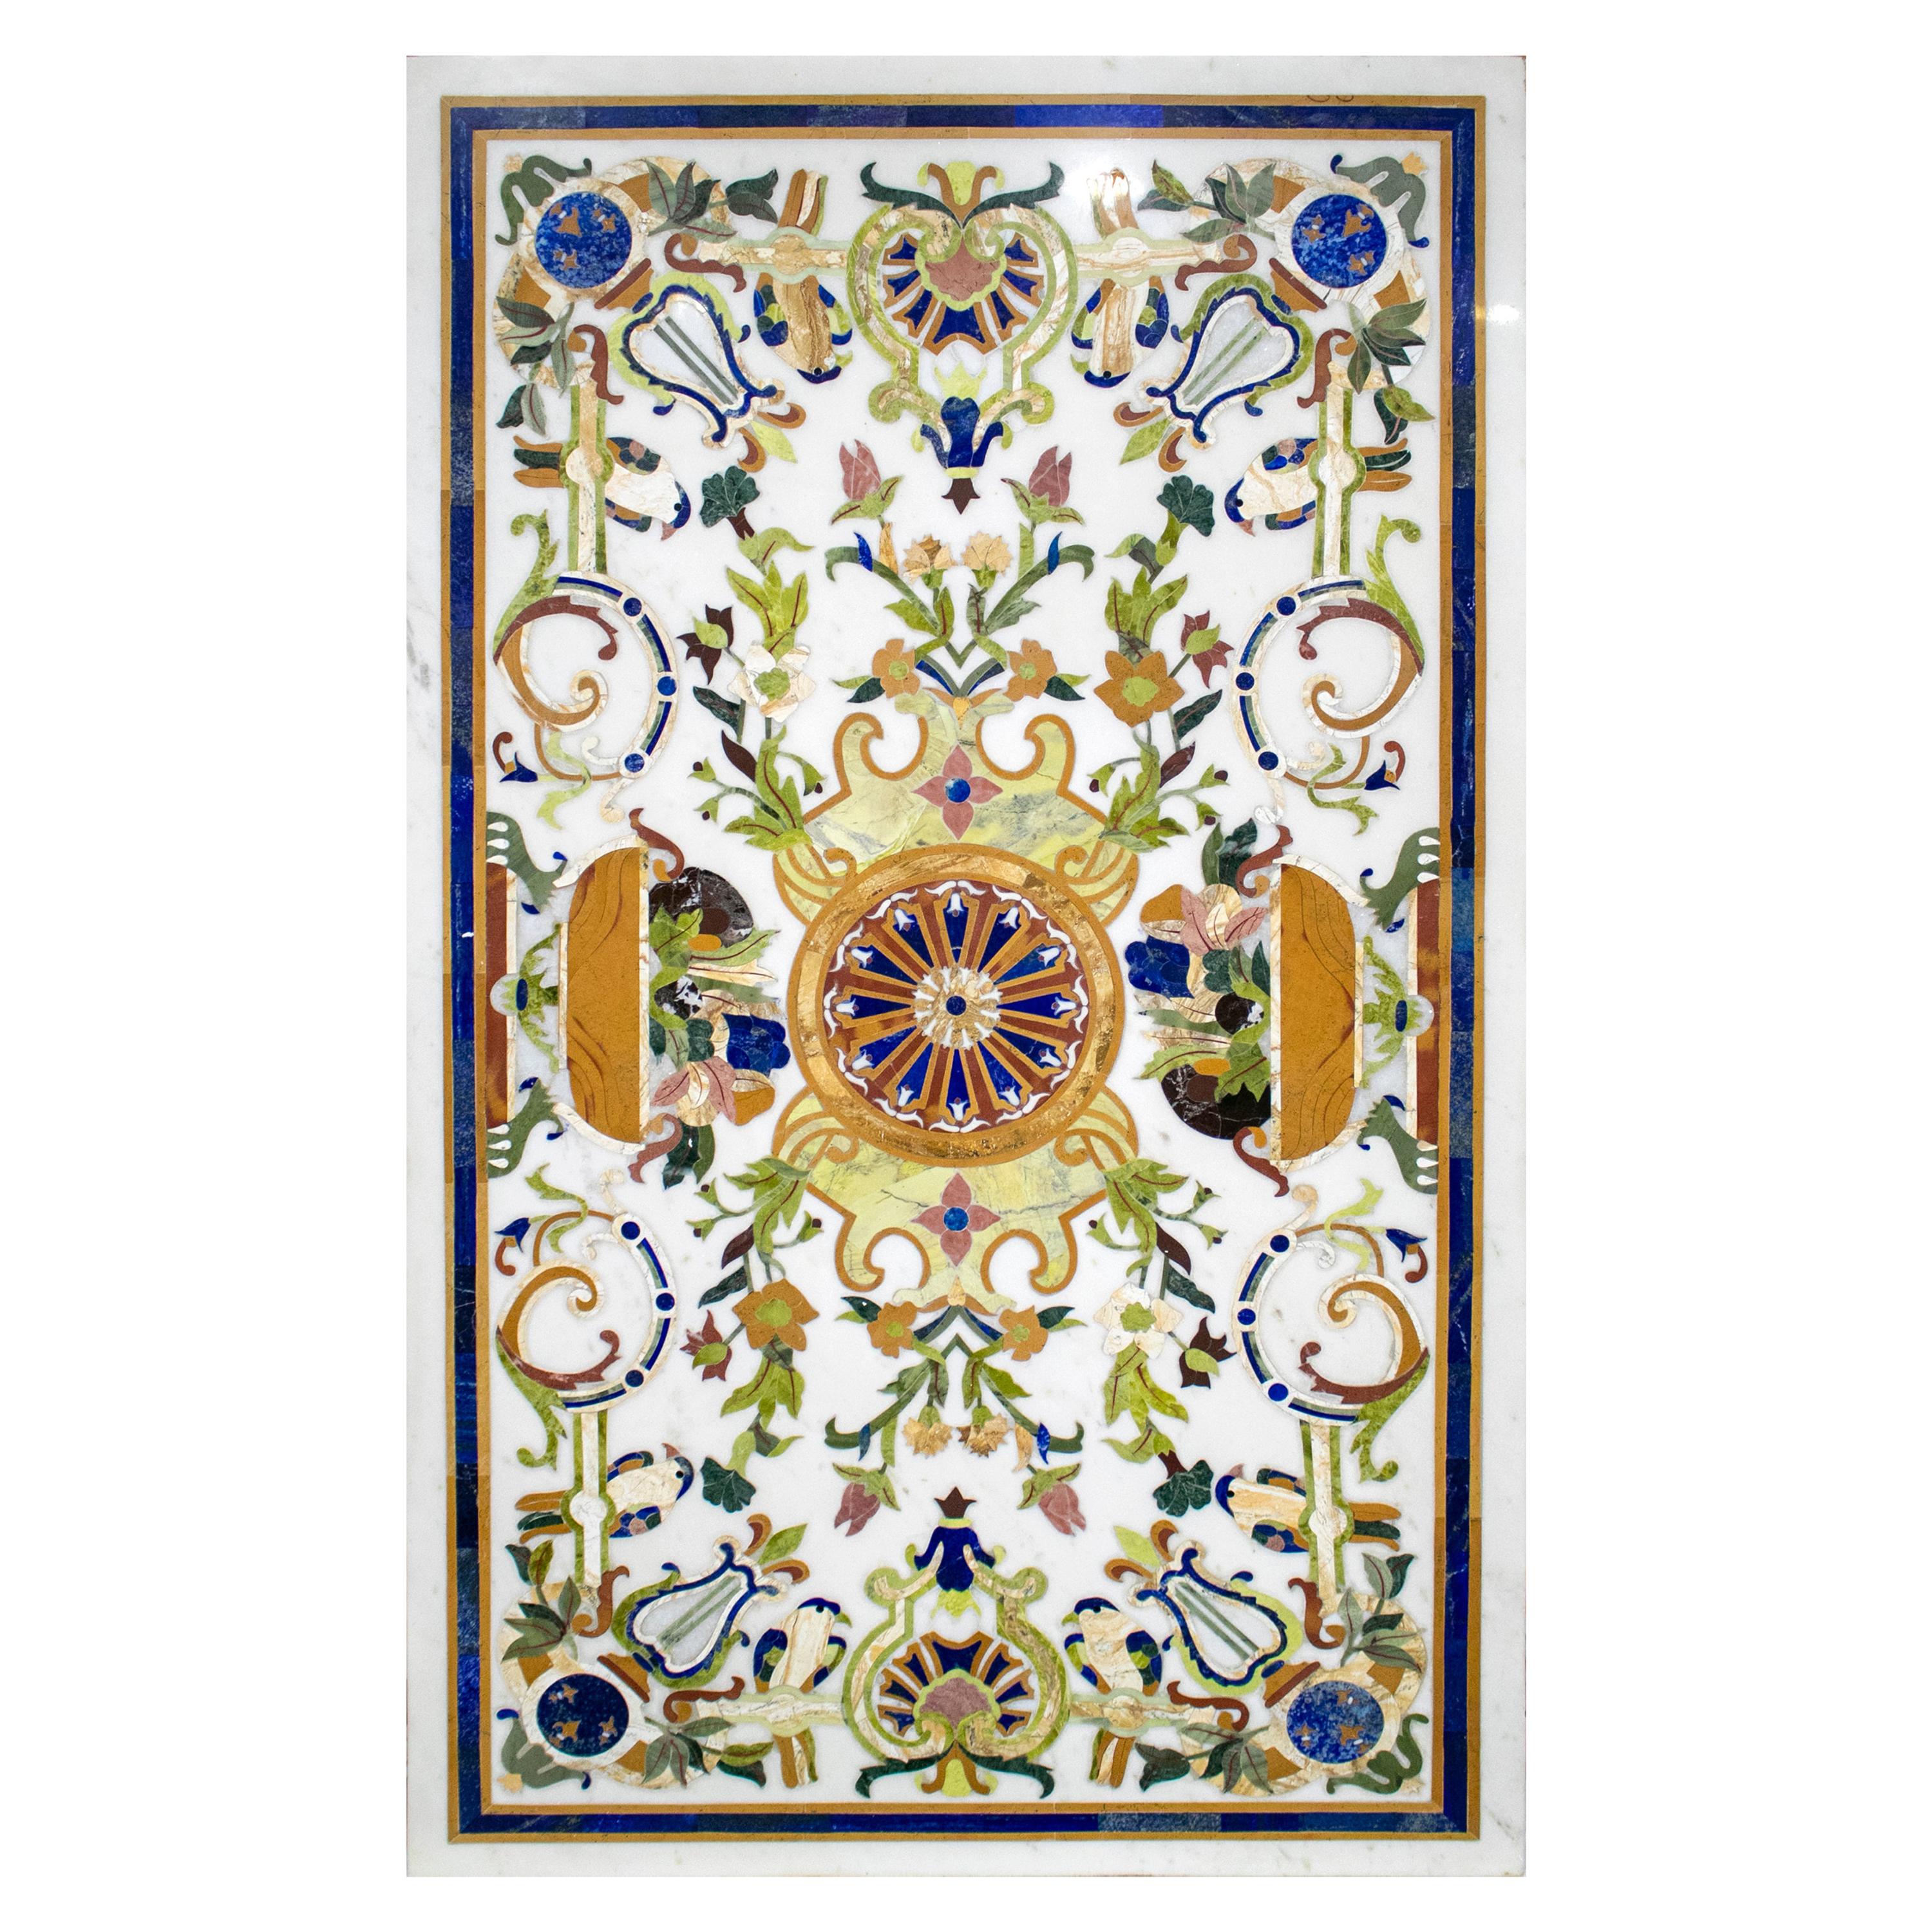 Rectangular Pietre Dure Classical Mosaic White Marble Table Top